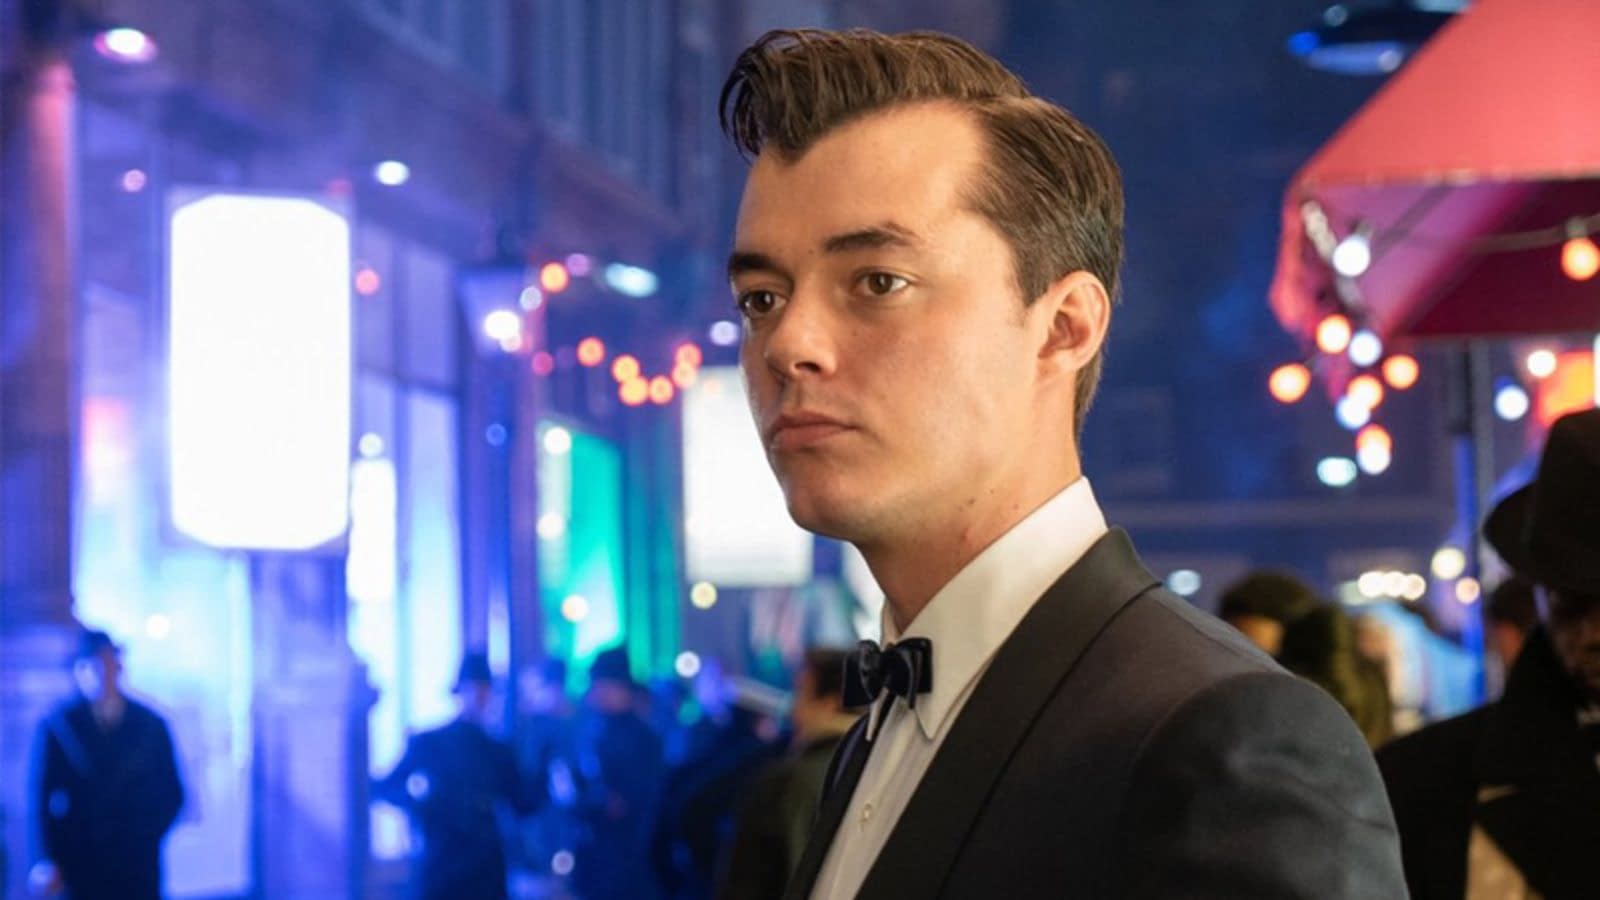 "Pennyworth": Batman Prequel Series &#038; '60s London Fever Dream &#8211; Wrapped Up in One! [OPINION]